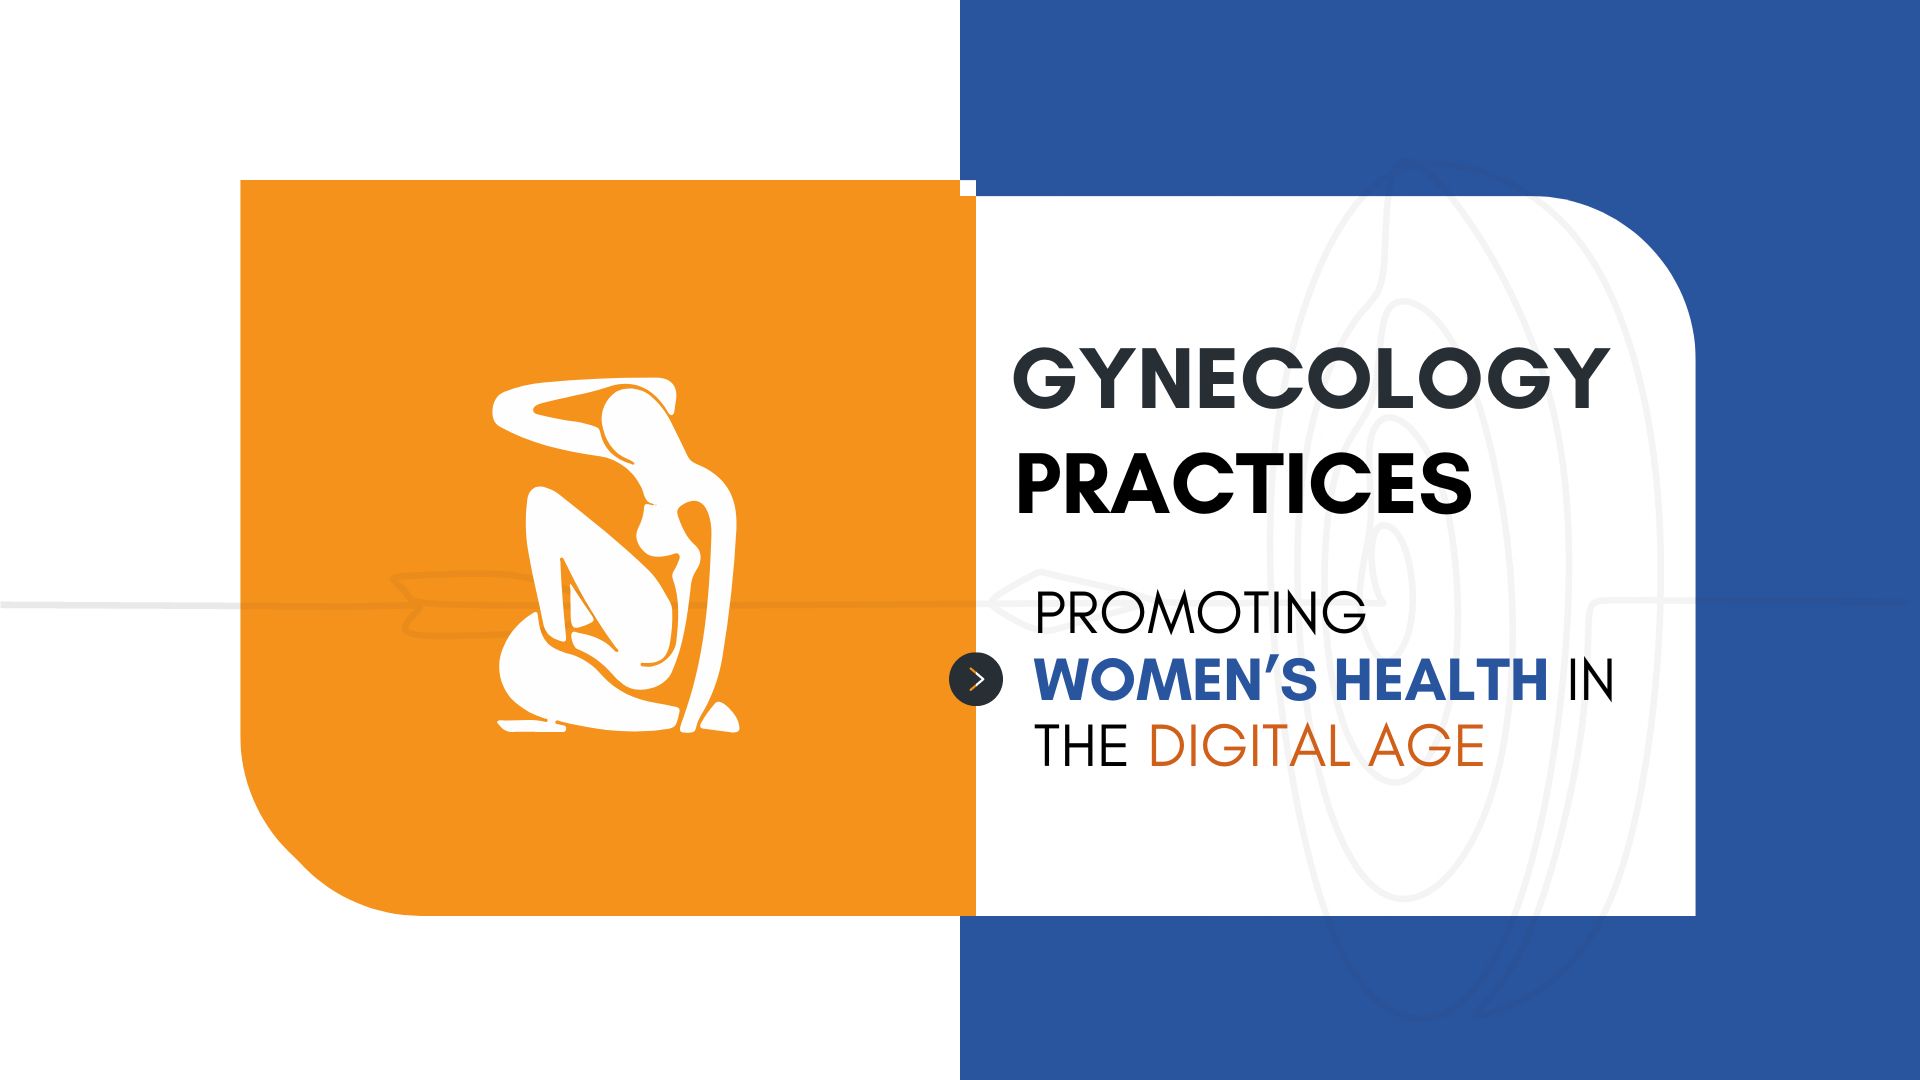 Gynecology Practices: Promoting Women’s Health In The Digital Age